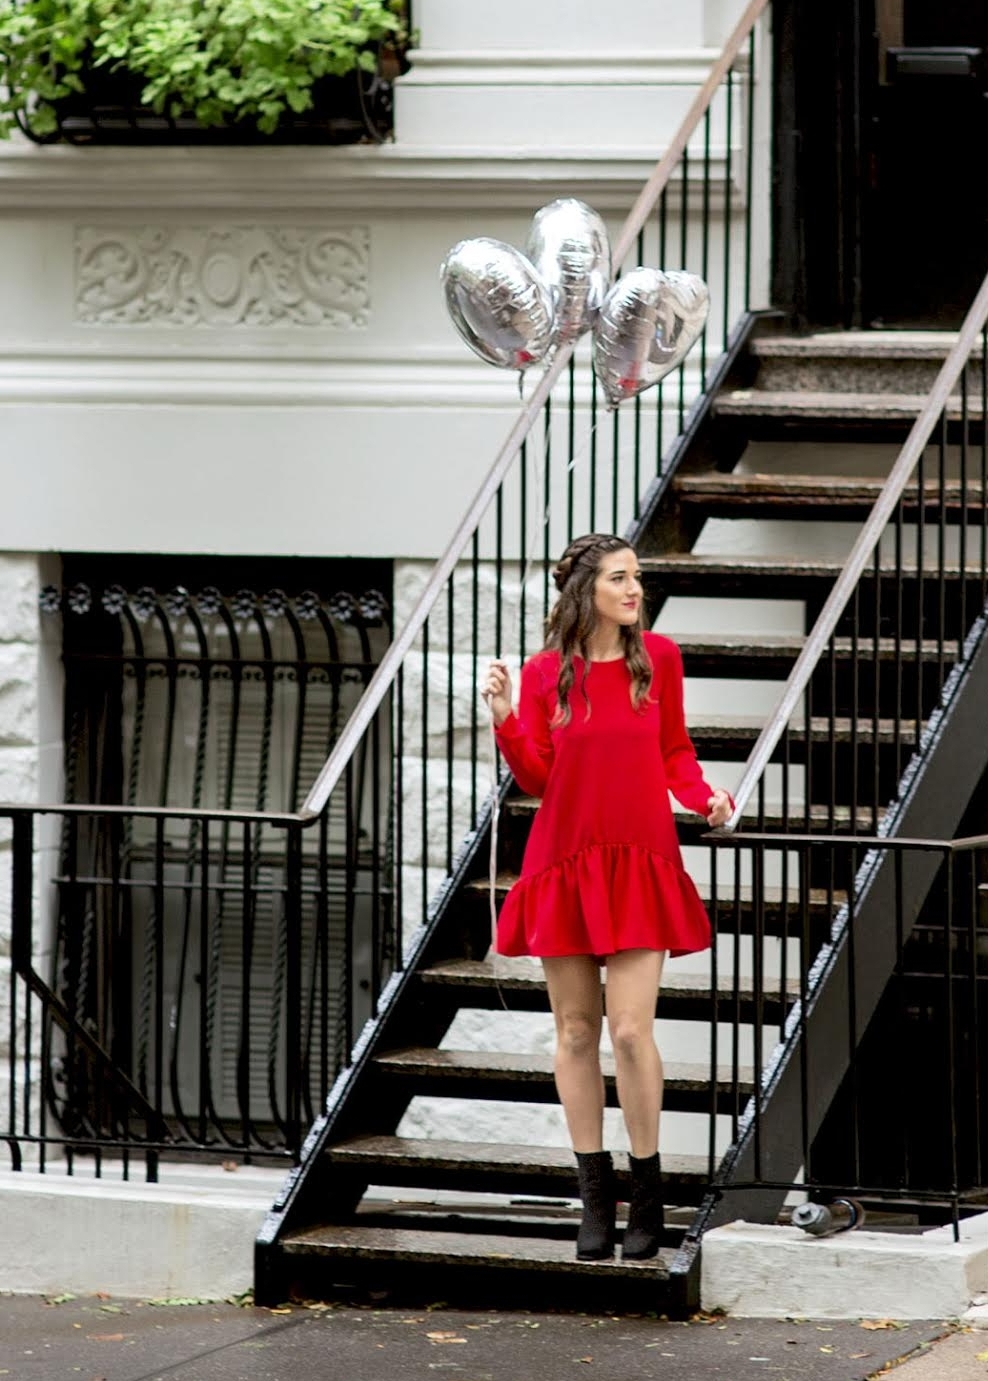 My Birthday Look Red Romper Black Booties Louboutins & Love Fashion Blog NYC Street Style Blogger Esther Santer M4D3 Shoes Trendy Outfit Pretty Beautiful Look What To Wear Shop Silver Photoshoot Balloons Fun City Lifestyle Girl Dress Women Hair Braids.jpg